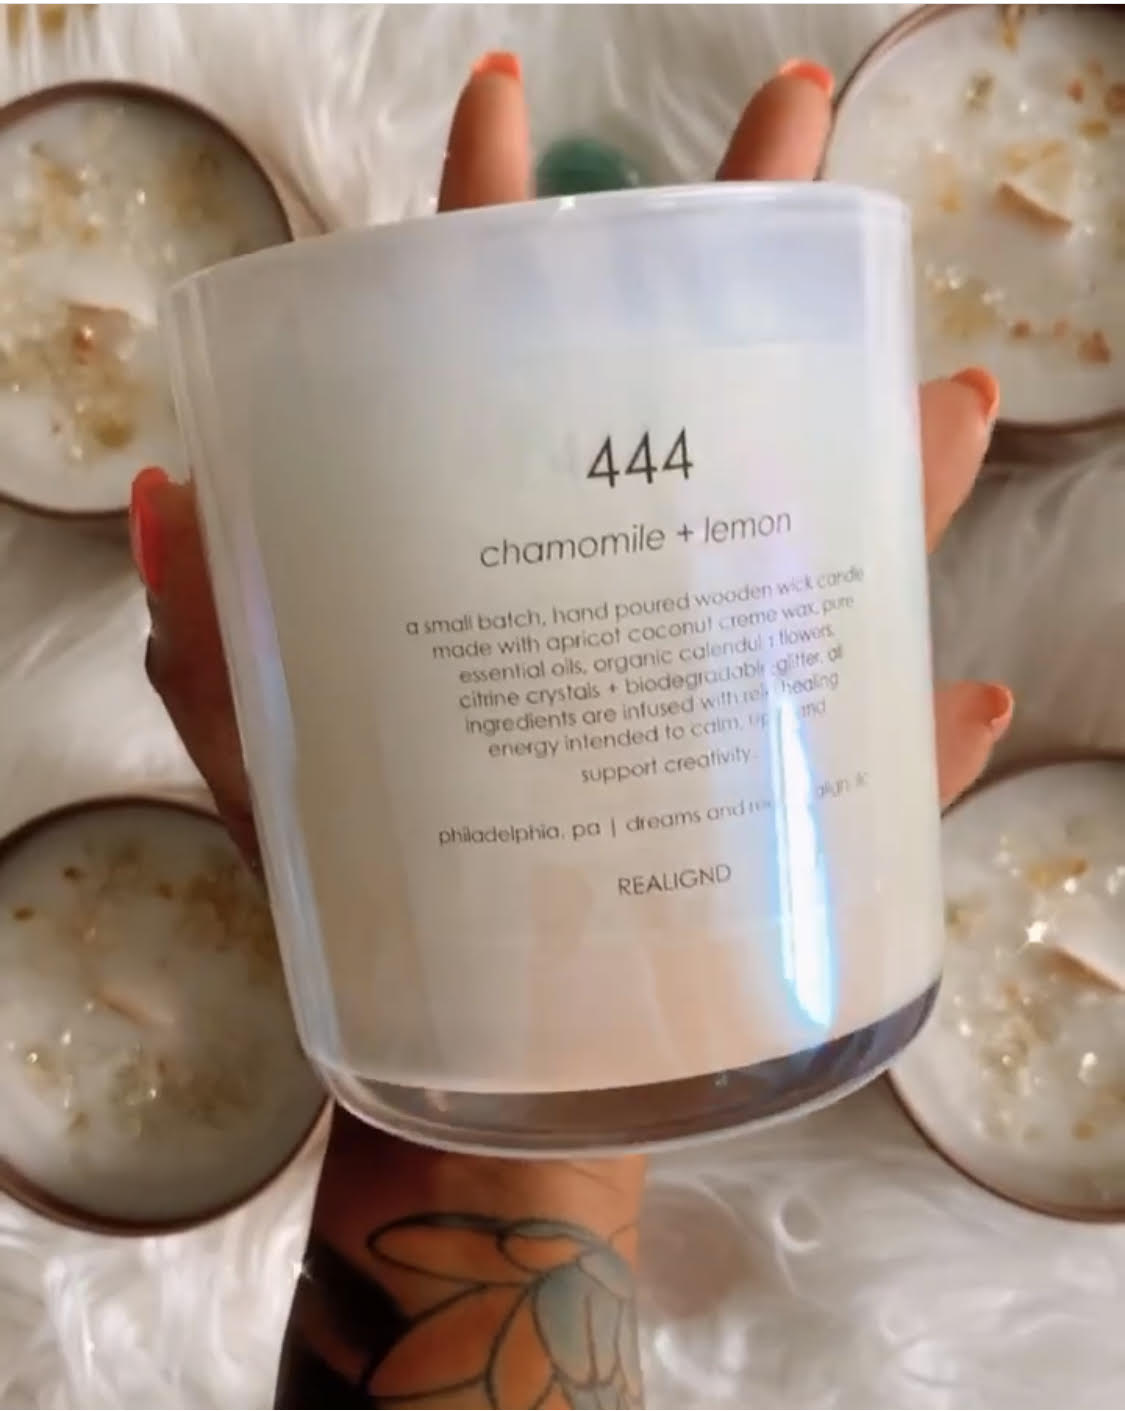 The reALIGNd.co 444 Candle